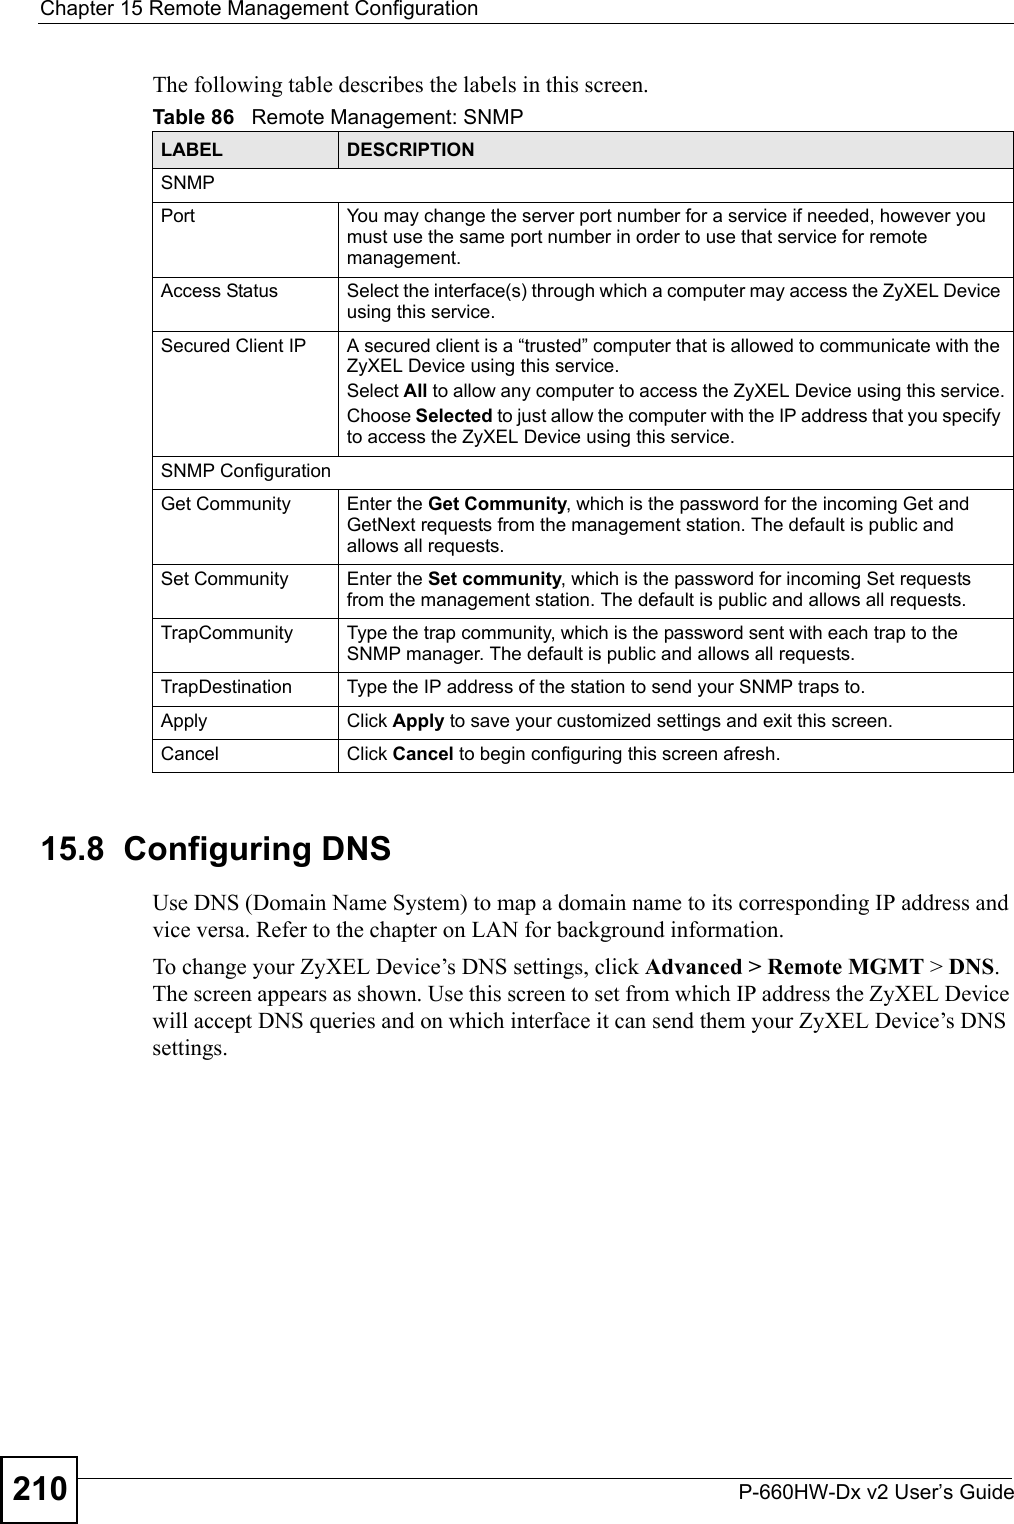 Chapter 15 Remote Management ConfigurationP-660HW-Dx v2 User’s Guide210The following table describes the labels in this screen.15.8  Configuring DNS Use DNS (Domain Name System) to map a domain name to its corresponding IP address and vice versa. Refer to the chapter on LAN for background information. To change your ZyXEL Device’s DNS settings, click Advanced &gt; Remote MGMT &gt; DNS. The screen appears as shown. Use this screen to set from which IP address the ZyXEL Device will accept DNS queries and on which interface it can send them your ZyXEL Device’s DNS settings.Table 86   Remote Management: SNMPLABEL DESCRIPTIONSNMPPort You may change the server port number for a service if needed, however you must use the same port number in order to use that service for remote management.Access Status Select the interface(s) through which a computer may access the ZyXEL Device using this service.Secured Client IP A secured client is a “trusted” computer that is allowed to communicate with the ZyXEL Device using this service. Select All to allow any computer to access the ZyXEL Device using this service.Choose Selected to just allow the computer with the IP address that you specify to access the ZyXEL Device using this service.SNMP ConfigurationGet Community Enter the Get Community, which is the password for the incoming Get and GetNext requests from the management station. The default is public and allows all requests.Set Community Enter the Set community, which is the password for incoming Set requests from the management station. The default is public and allows all requests.TrapCommunity Type the trap community, which is the password sent with each trap to the SNMP manager. The default is public and allows all requests.TrapDestination Type the IP address of the station to send your SNMP traps to.Apply Click Apply to save your customized settings and exit this screen. Cancel Click Cancel to begin configuring this screen afresh.